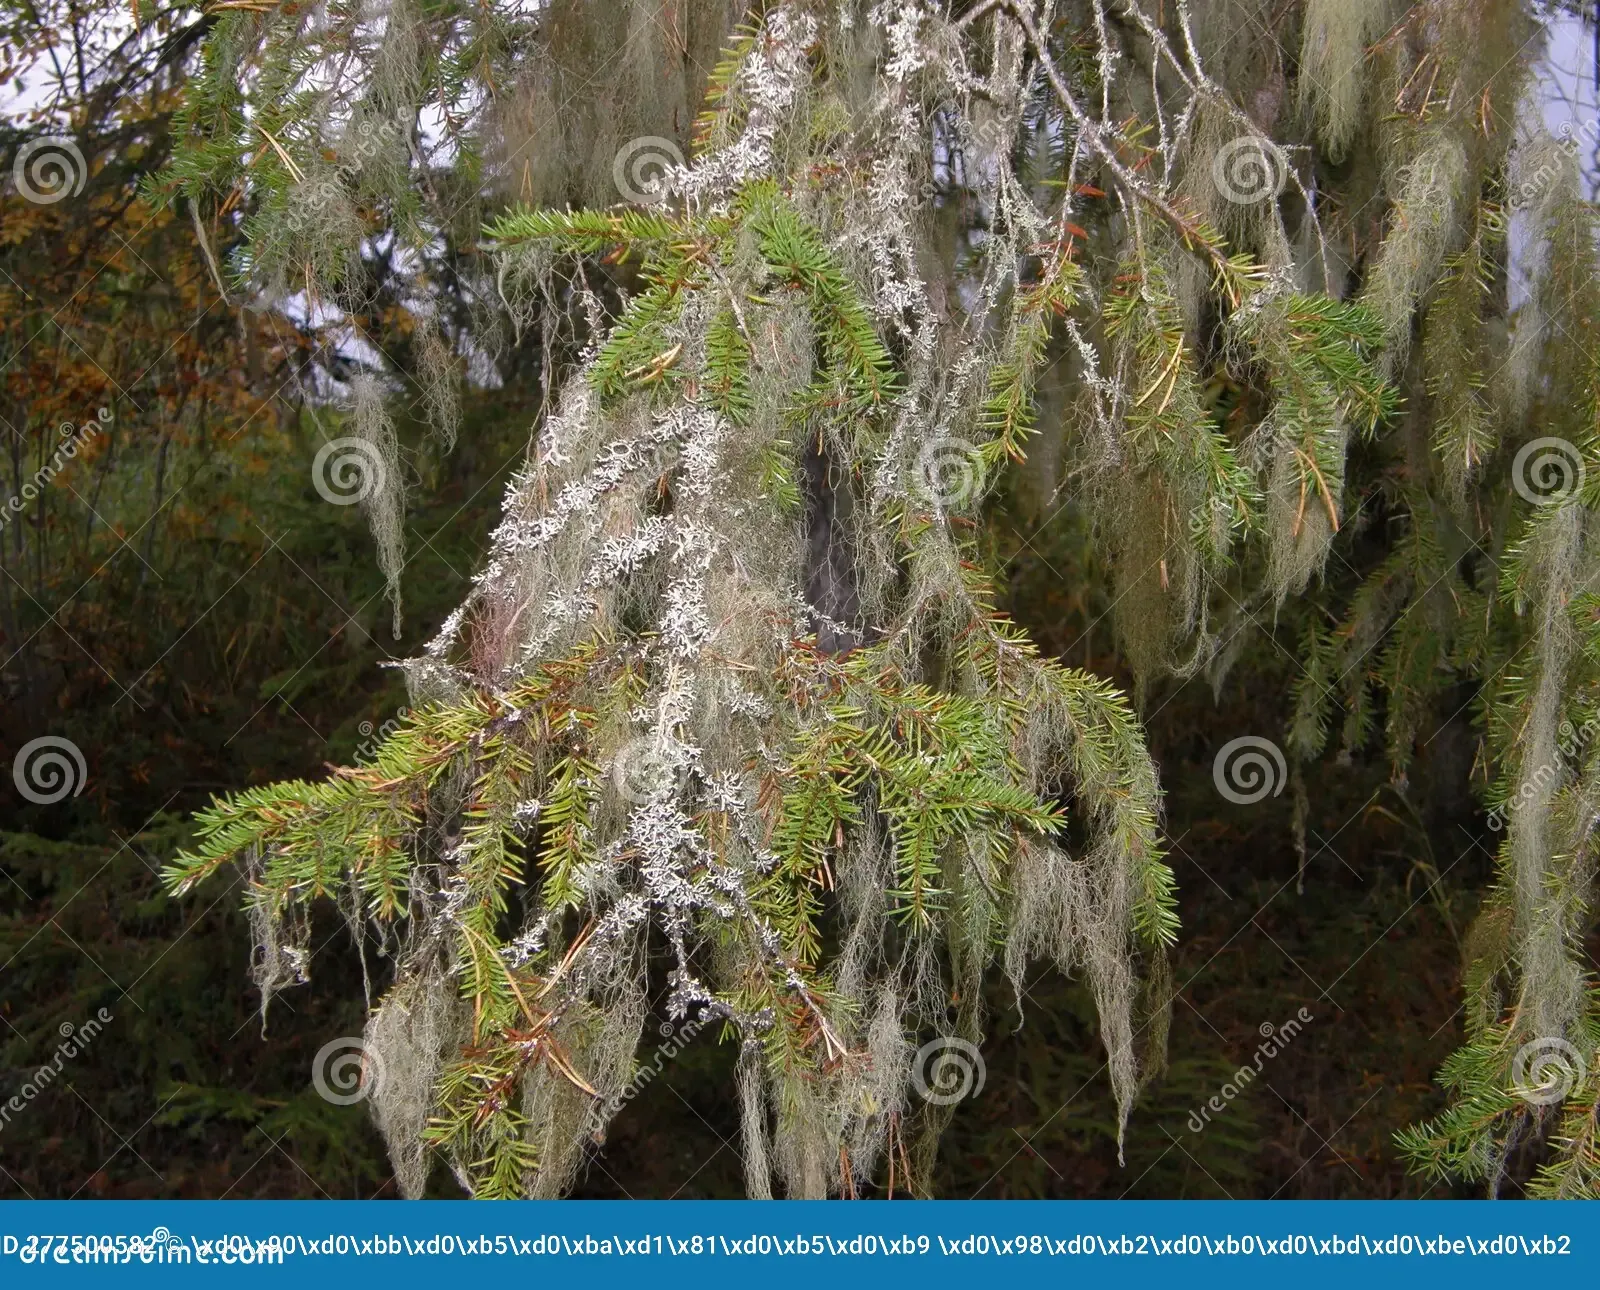 spruce-branches-heavily-covered-hanging-moss-lichen-republic-karelia-russia-spruce-branches-heavily-covered-277500582.jpg